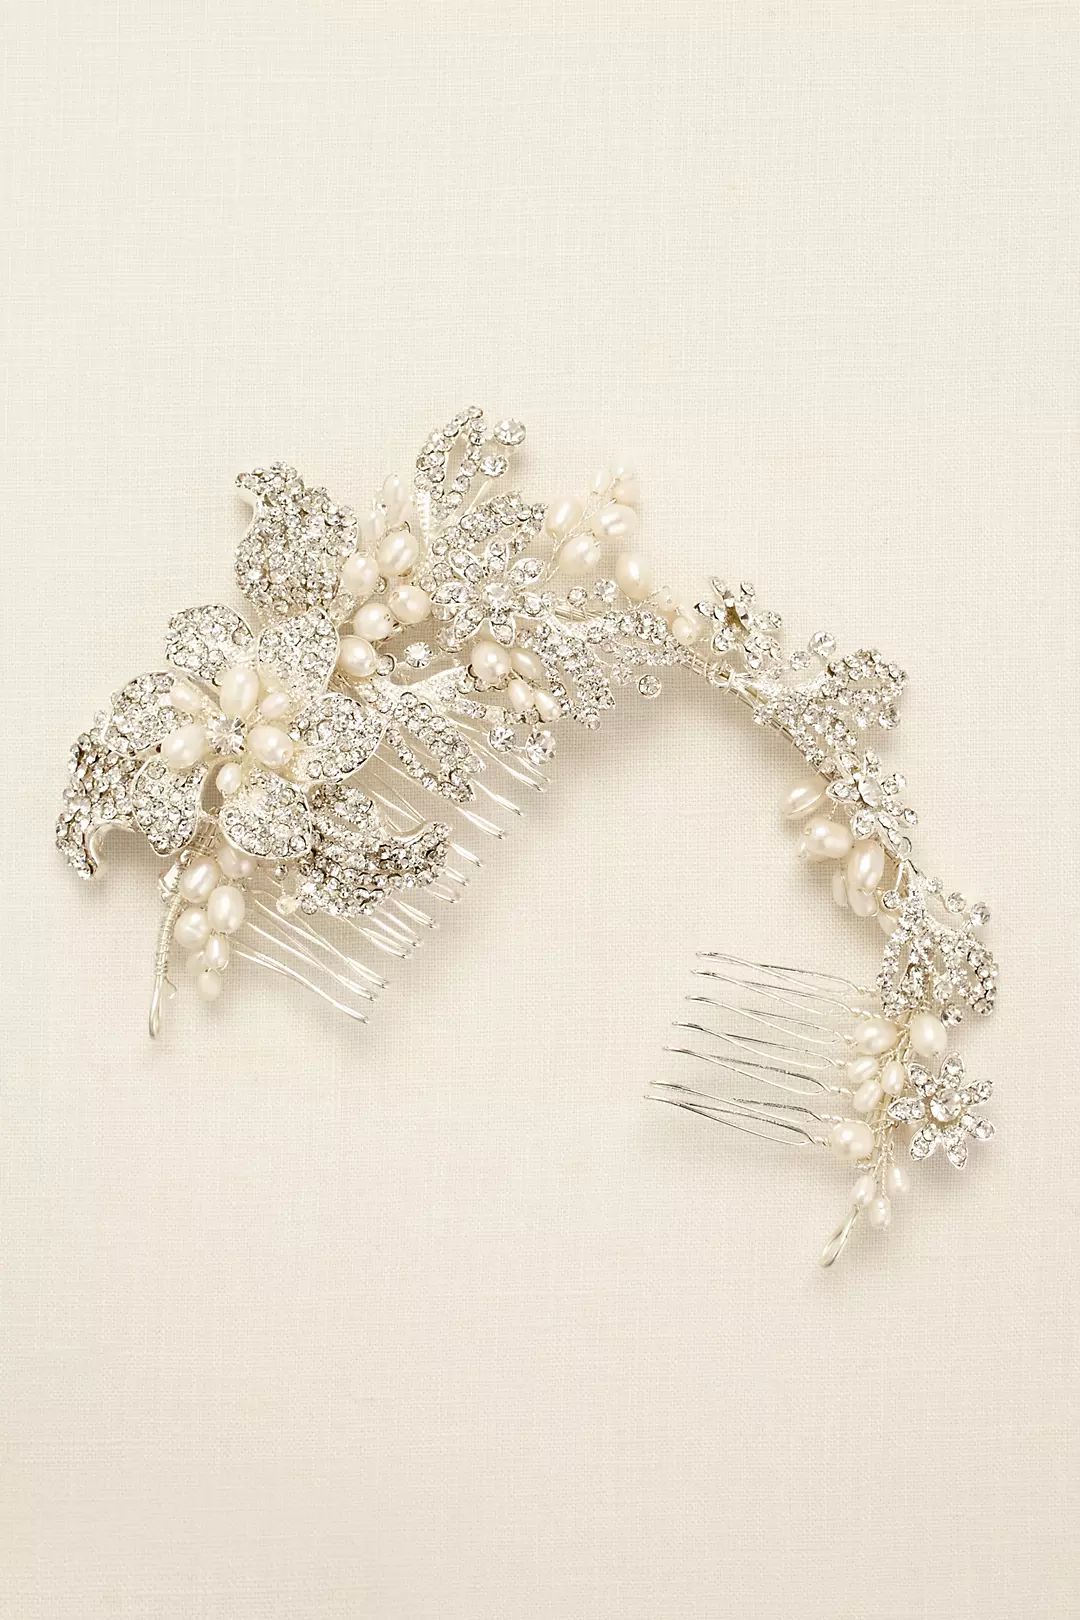 Pearl and Rhinestone Moldable Hair Wrap Image 3